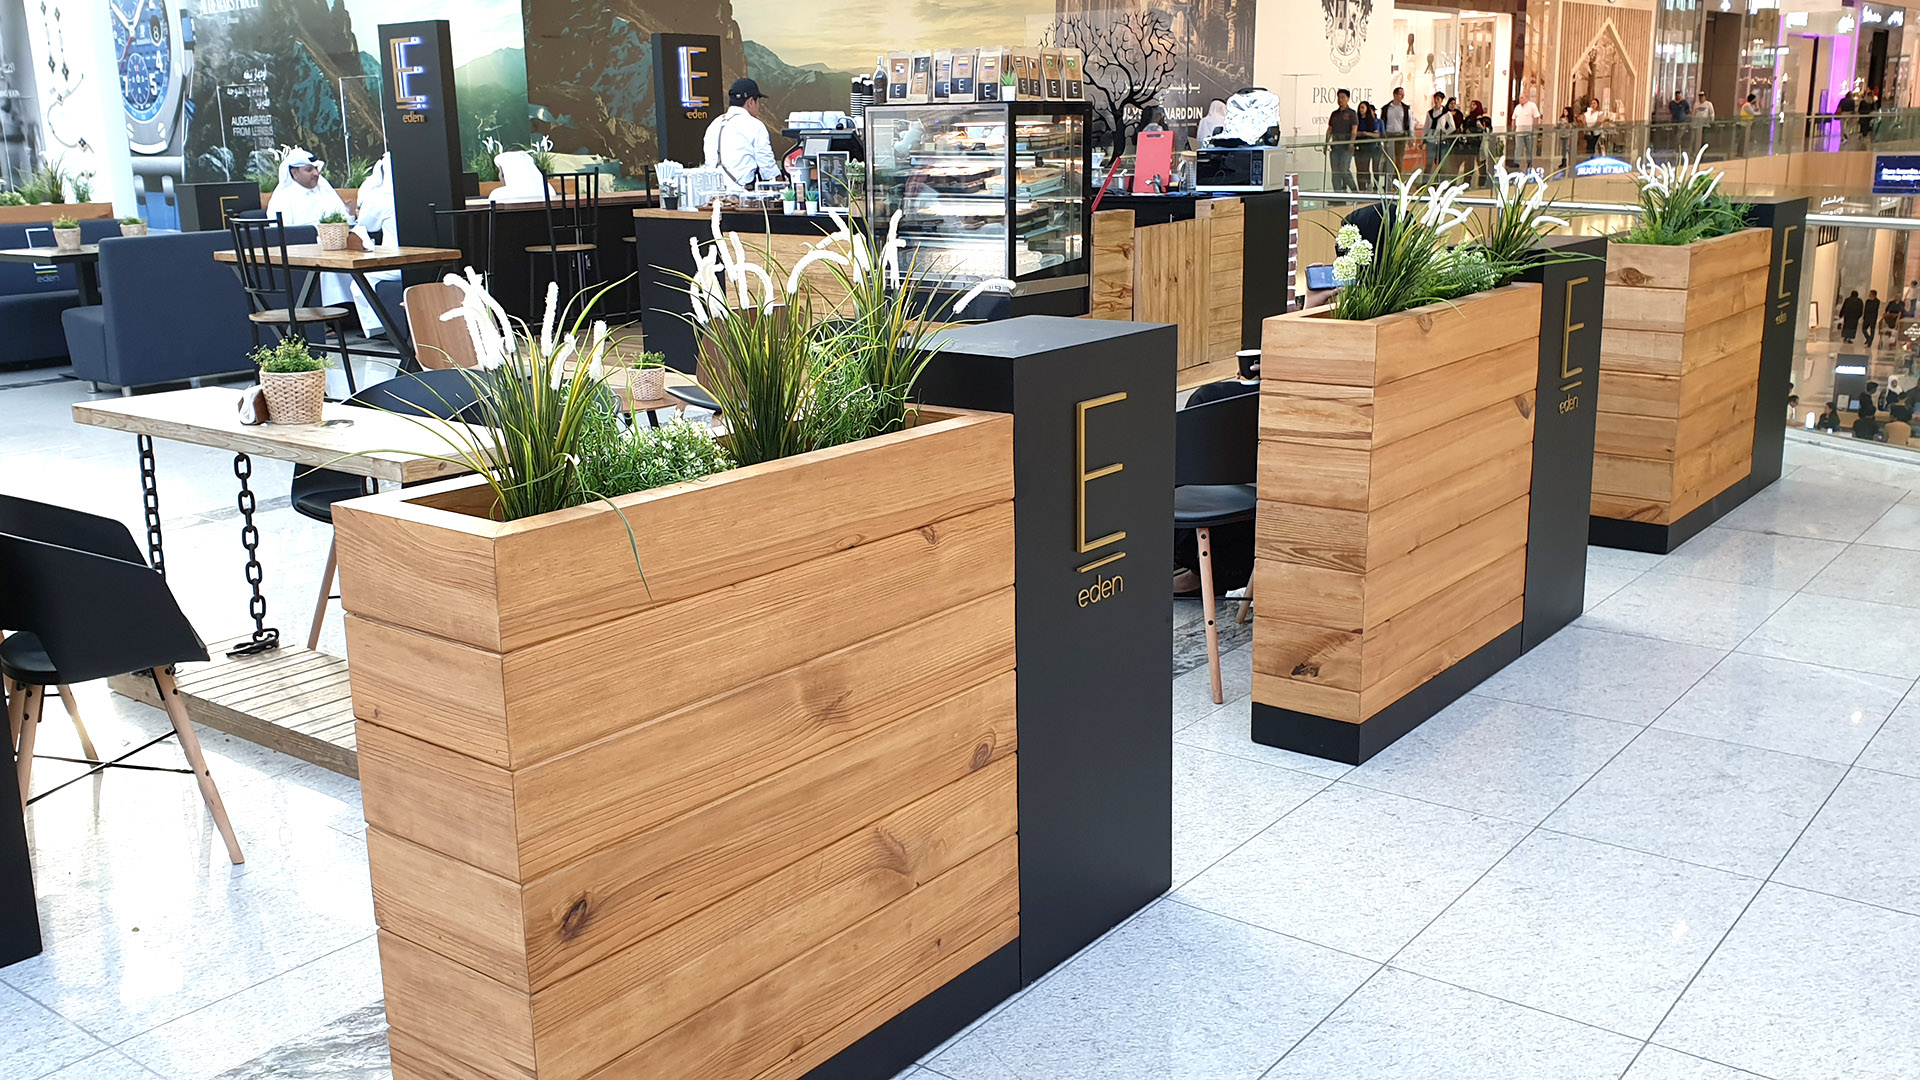 Eden Cafe Kiosk and Furniture custom fabricated from Timber and Steel by ME Visual, Qatar